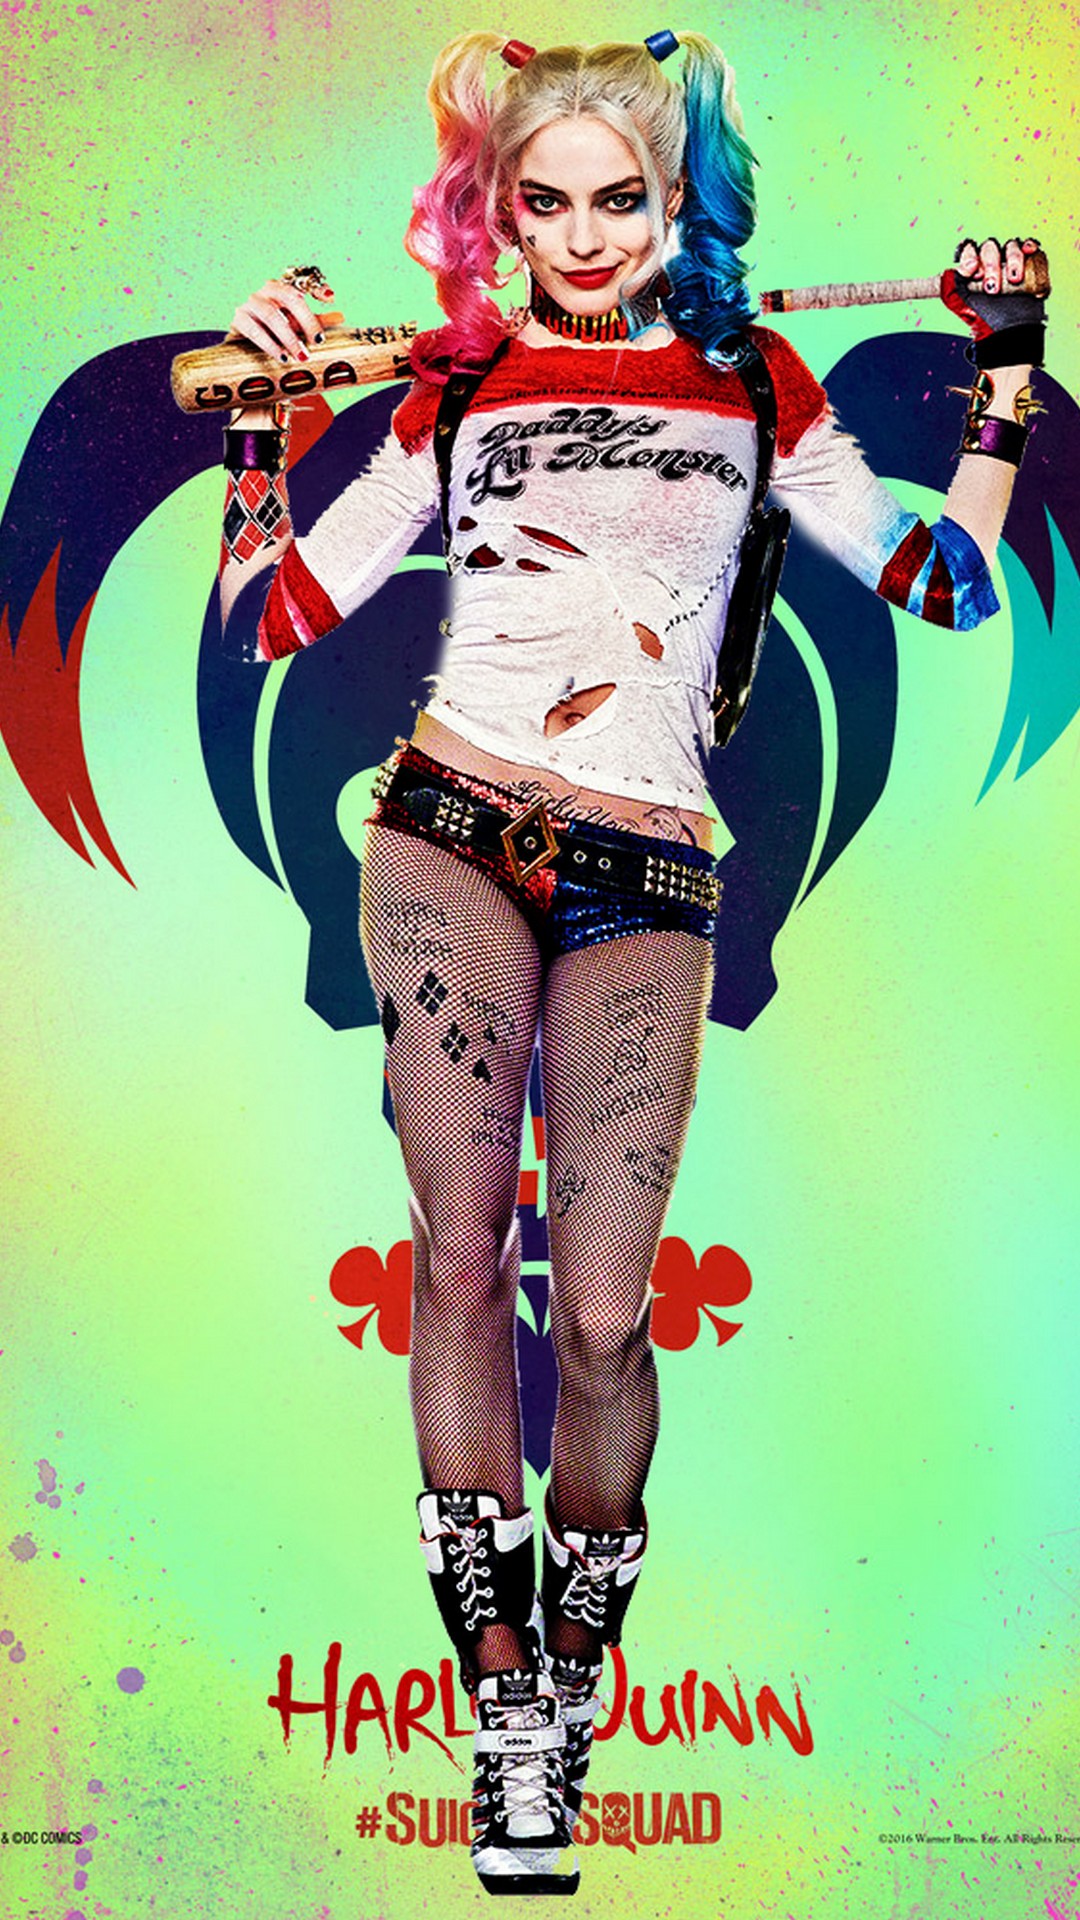 iPhone Wallpaper Harley Quinn Movie with image resolution 1080x1920 pixel. You can make this wallpaper for your iPhone 5, 6, 7, 8, X backgrounds, Mobile Screensaver, or iPad Lock Screen